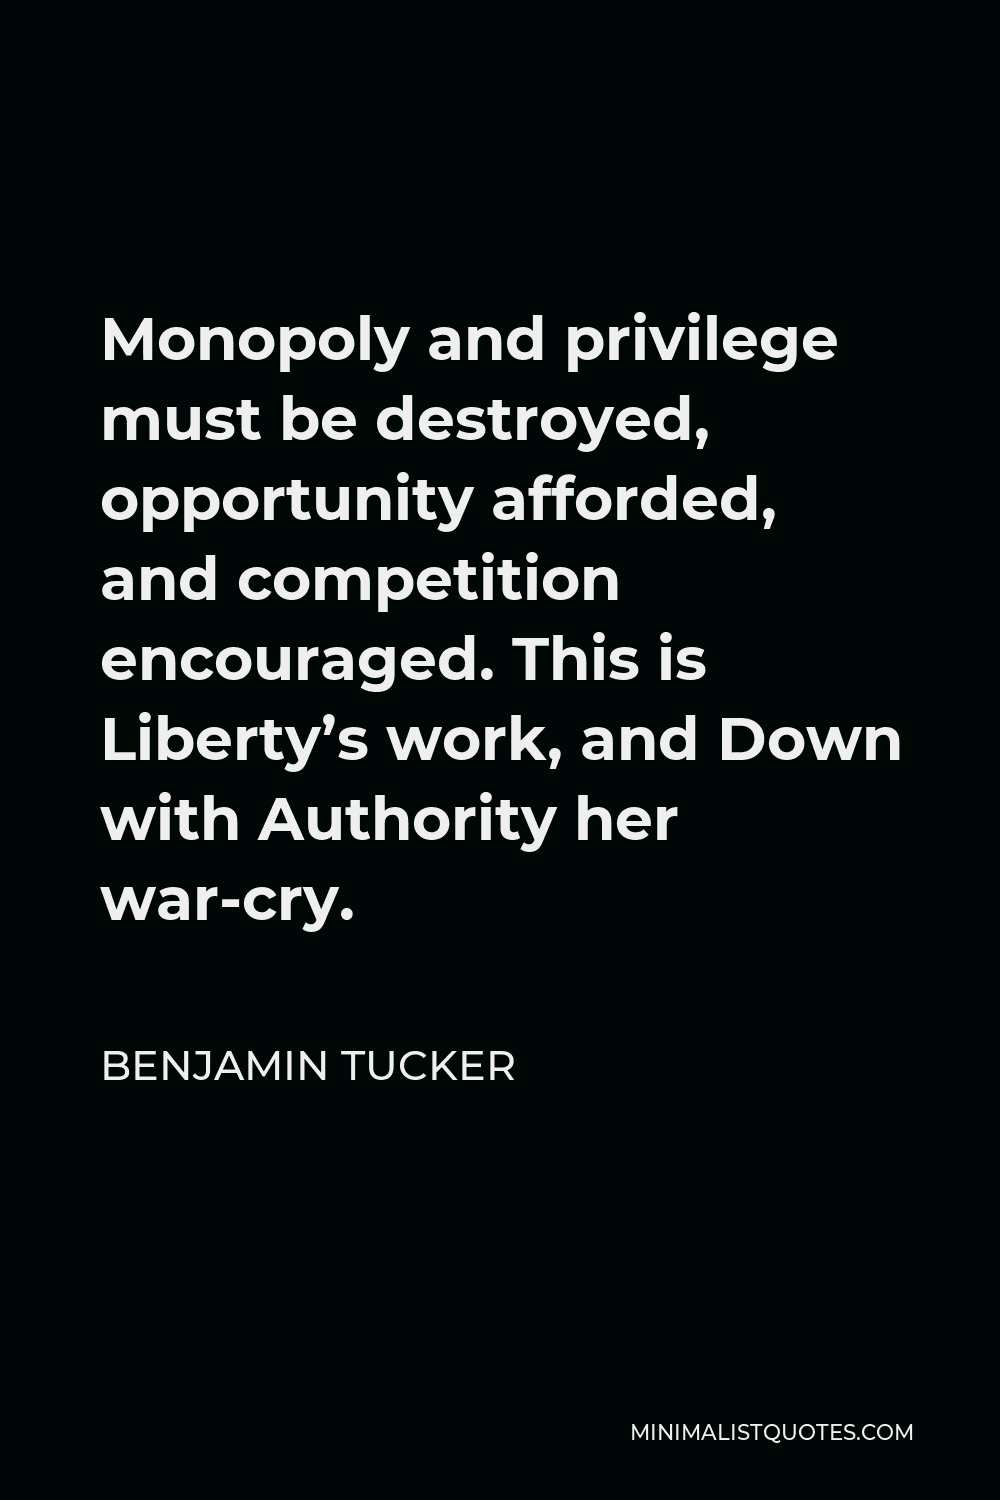 Benjamin Tucker Quote - Monopoly and privilege must be destroyed, opportunity afforded, and competition encouraged. This is Liberty’s work, and Down with Authority her war-cry.